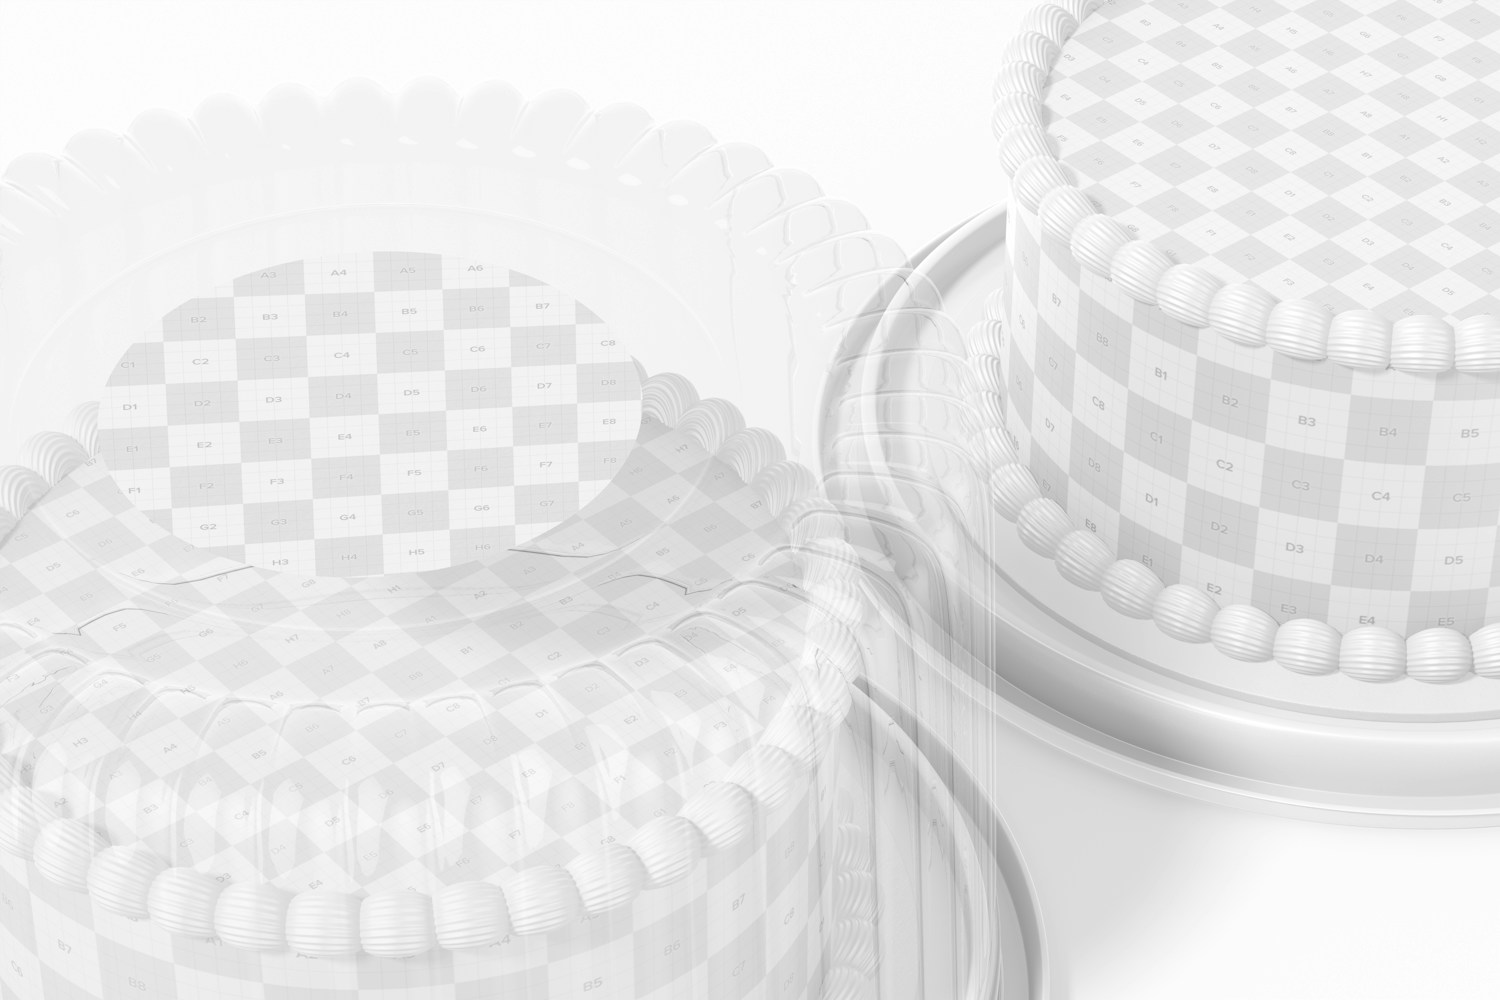 Plastic Round Cake Containers Mockup, Close Up